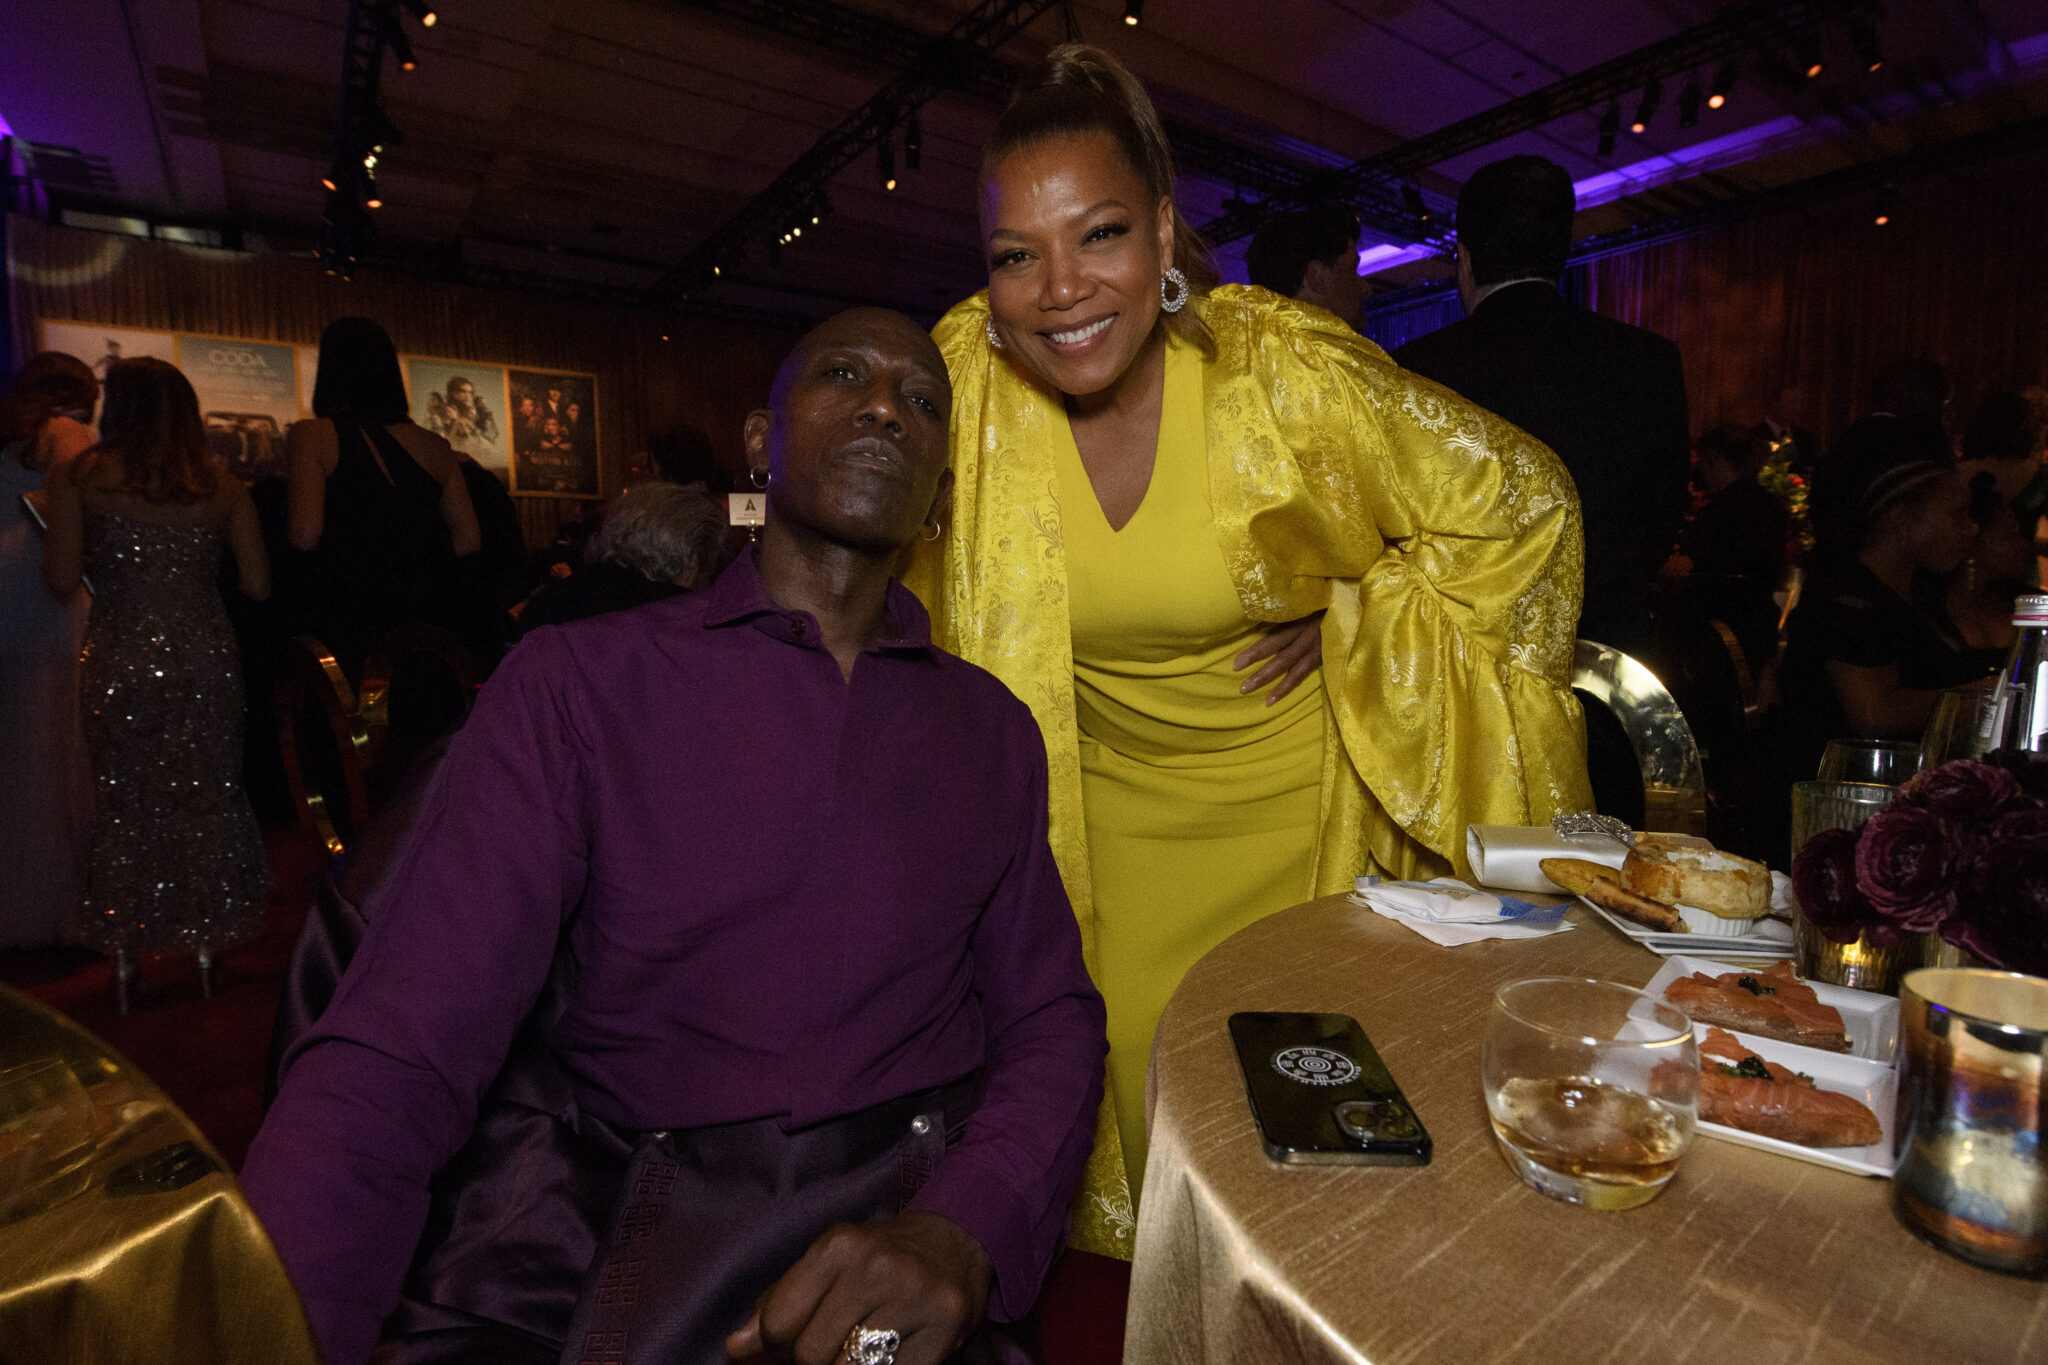 Wesley Snipes and Queen Latifah 94th Oscars® Awards 4Chion Lifestyle